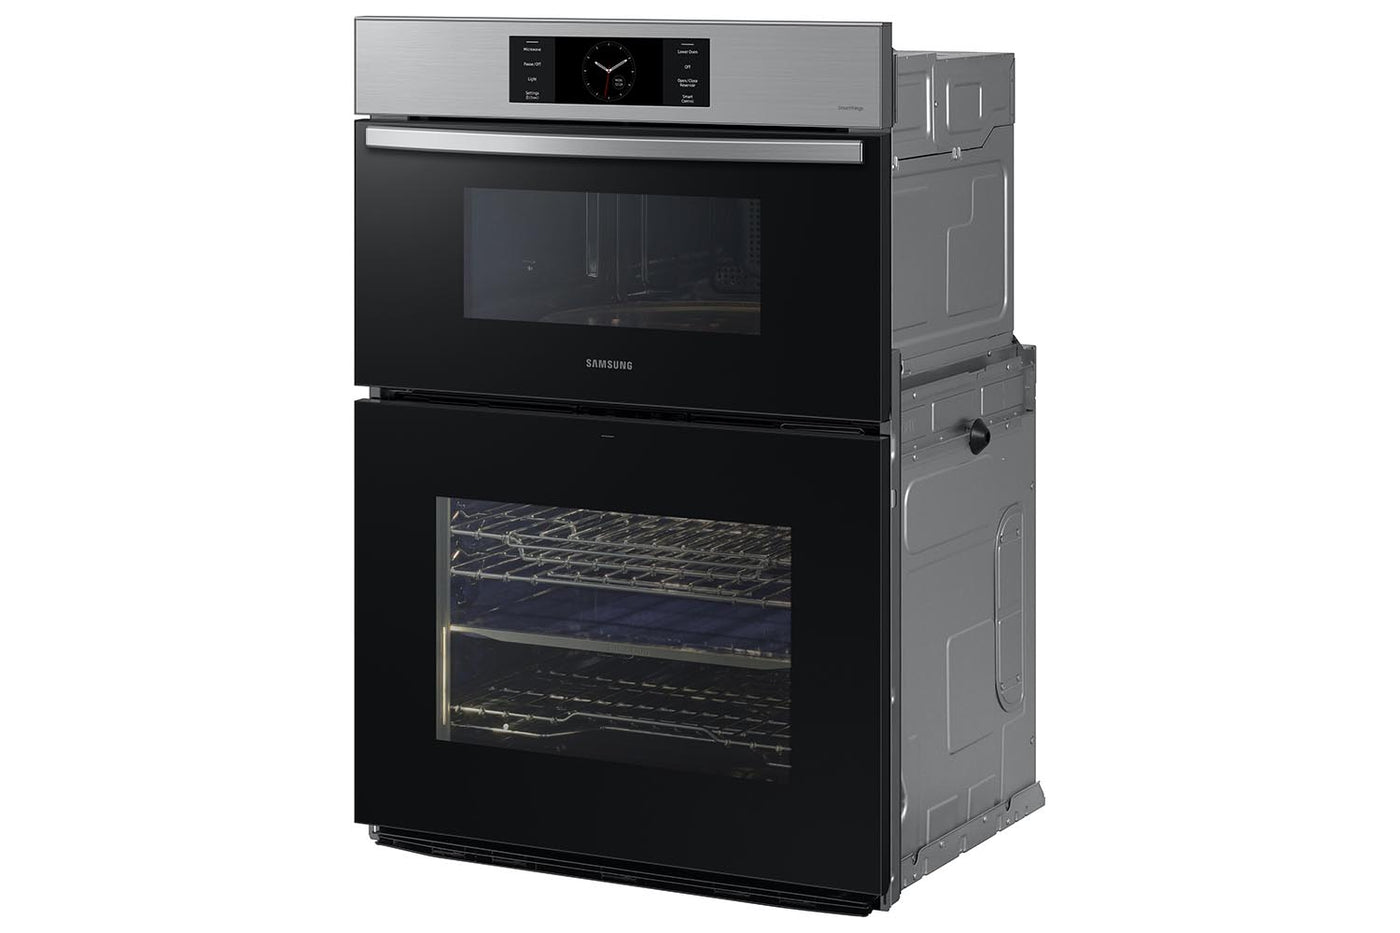 Samsung BESPOKE Stainless Steel Combination Wall Oven (7 cu. ft) - NQ70CG700DSRAA